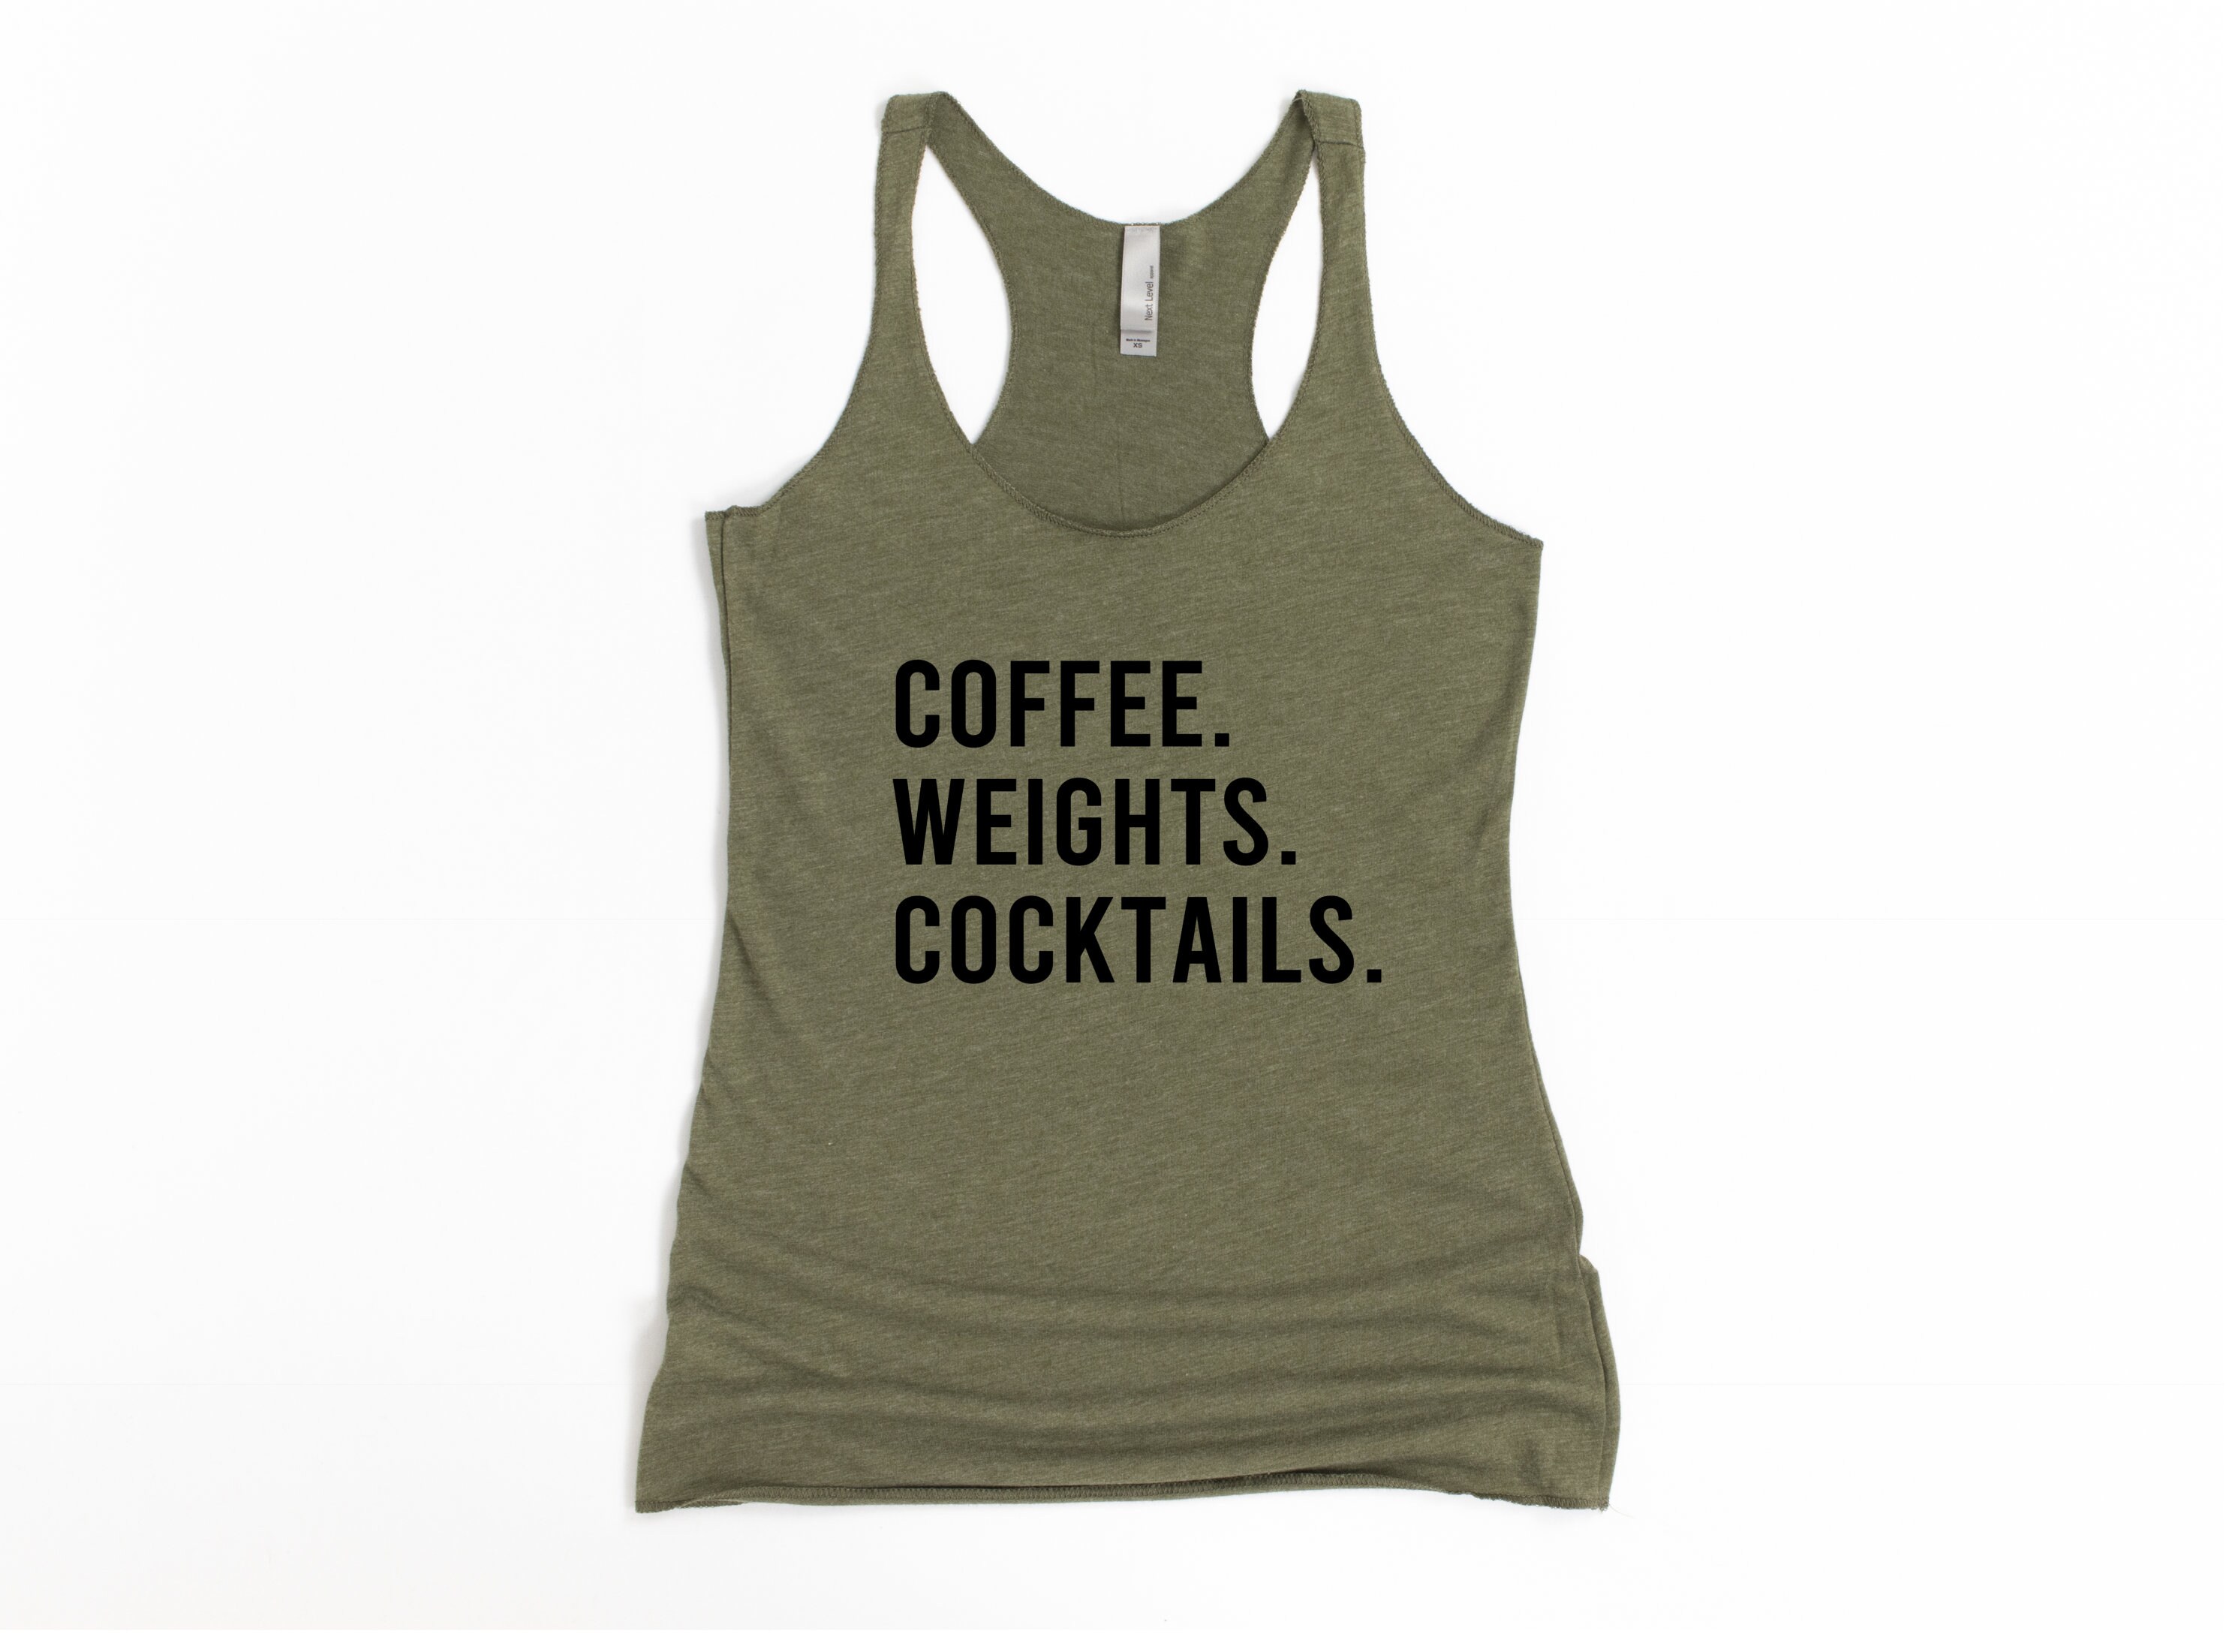 Workout Tanks For Women Coffee Weights Cocktails Gym Tanks | Etsy